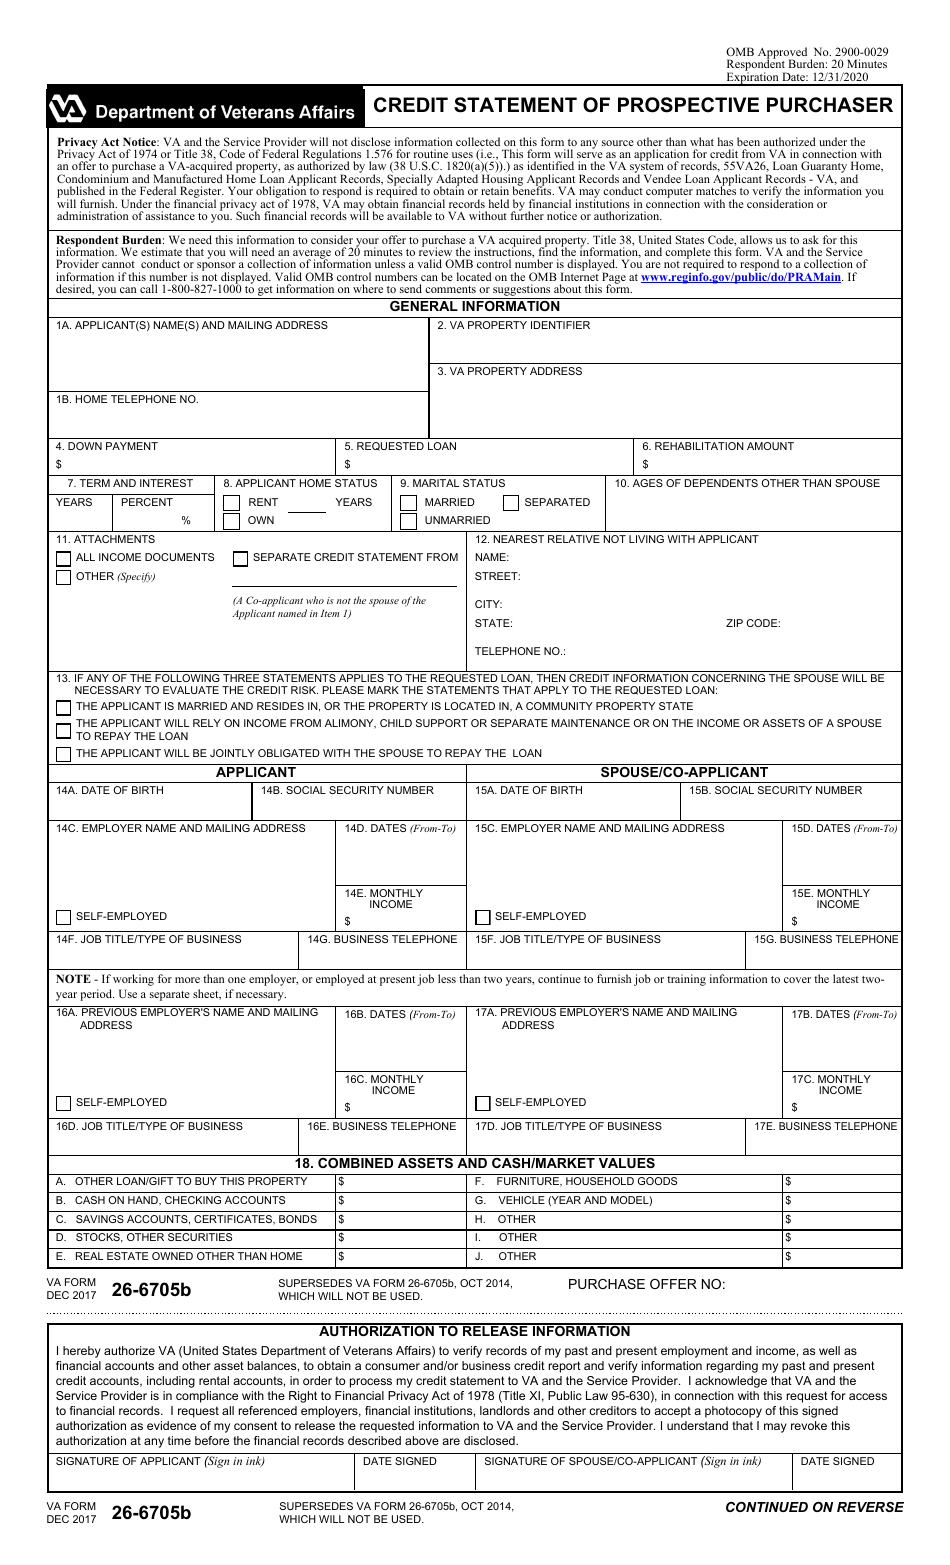 VA Form 26-6705b Credit Statement of Prospective Purchaser, Page 1